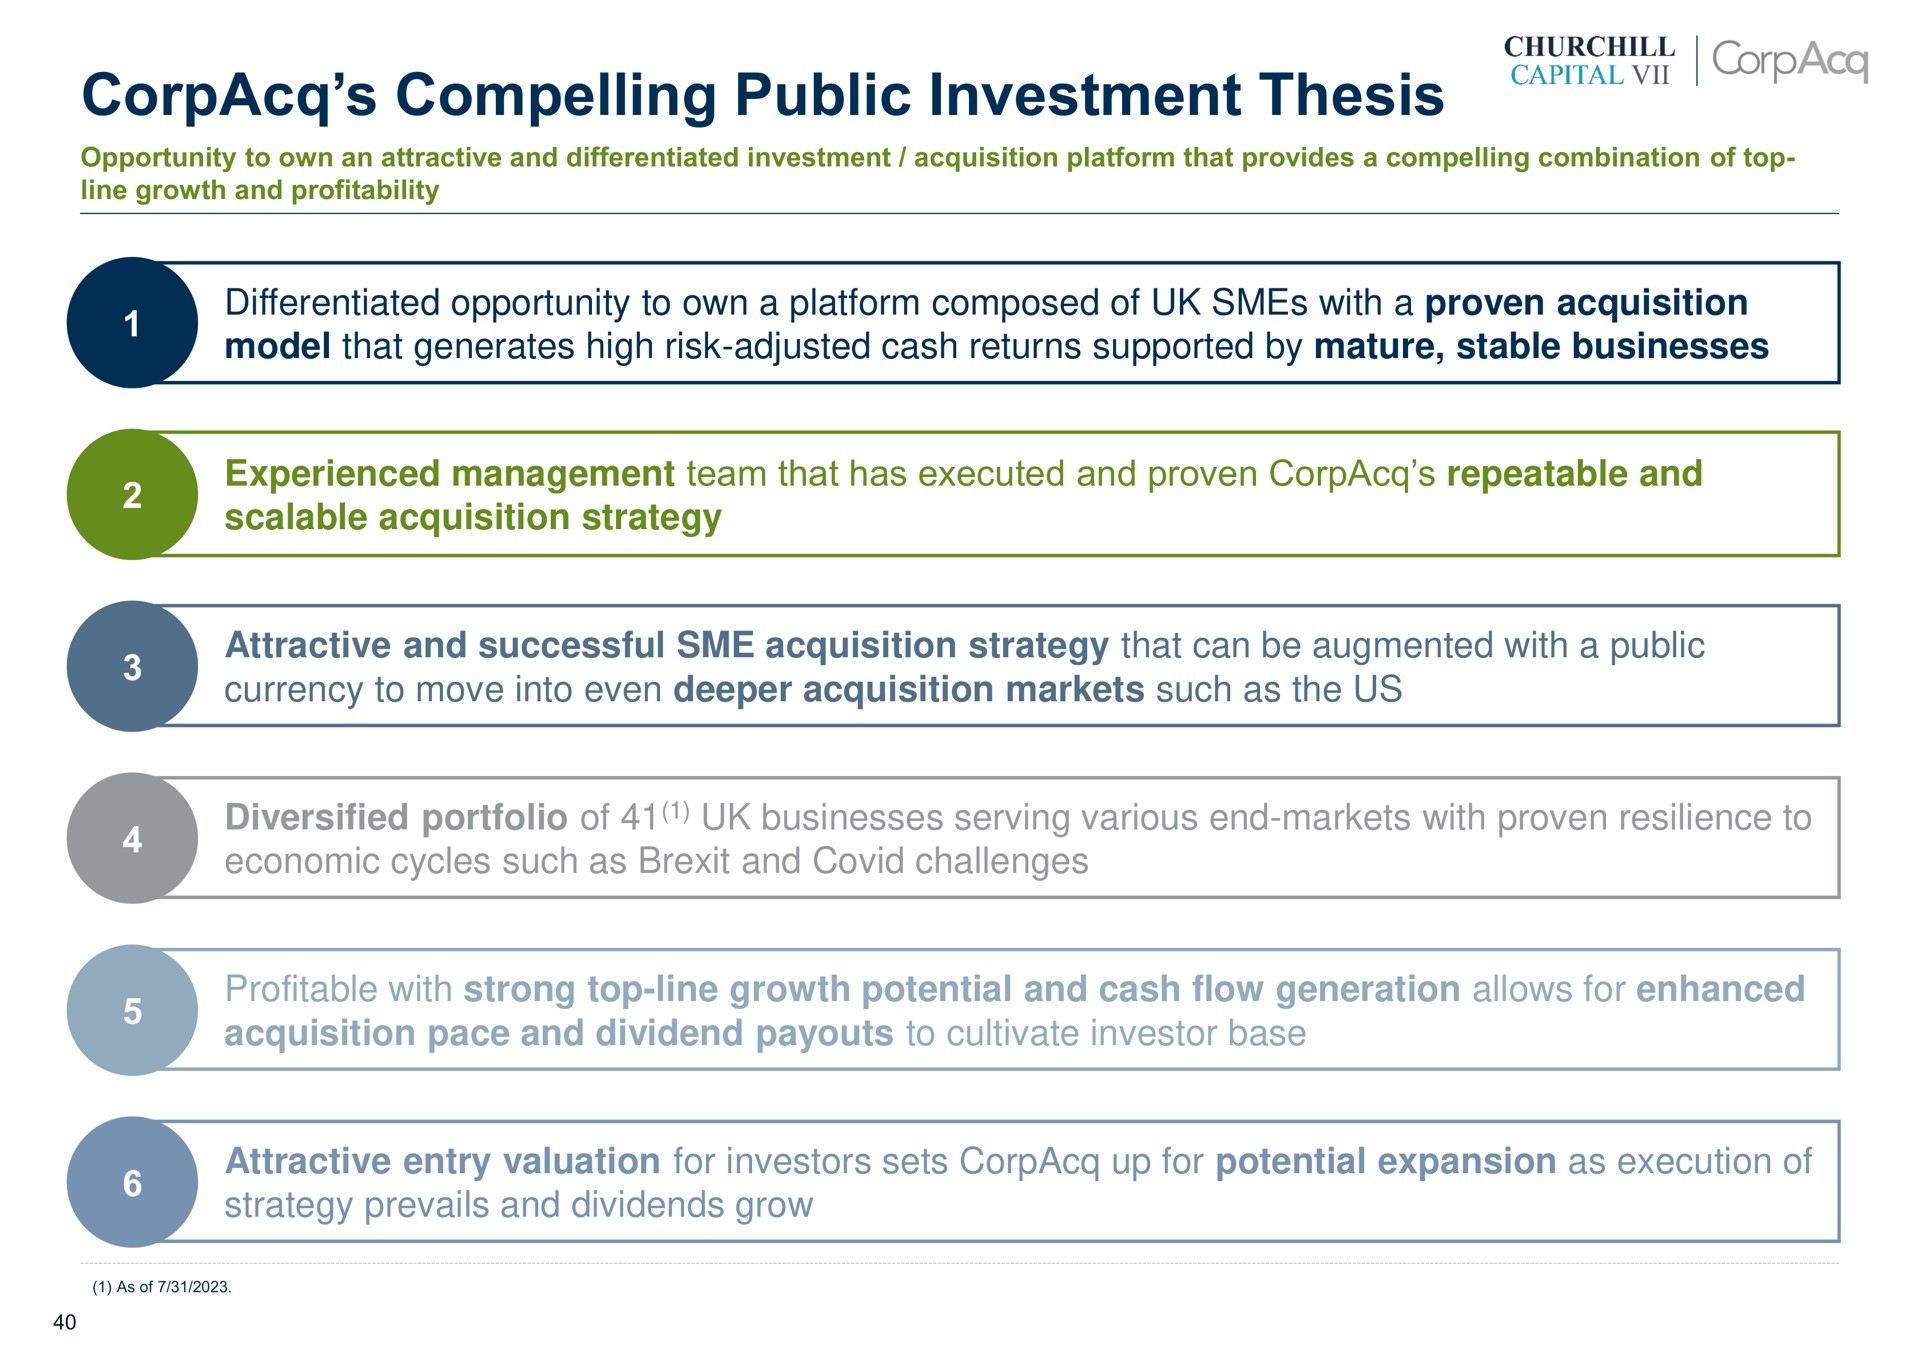 compelling public investment thesis differentiated opportunity to own a platform composed of with a proven acquisition model that generates high risk adjusted cash returns supported by mature stable businesses experienced management team that has executed and proven repeatable and scalable acquisition strategy attractive and successful acquisition strategy that can be augmented with a public currency to move into even acquisition markets such as the us diversified portfolio of businesses serving various end markets with proven resilience to economic cycles such as and covid challenges profitable with strong top line growth potential and cash flow generation allows for enhanced acquisition pace and dividend to cultivate investor base attractive entry valuation for investors sets up for potential expansion as execution of strategy prevails and dividends grow capital | CorpAcq